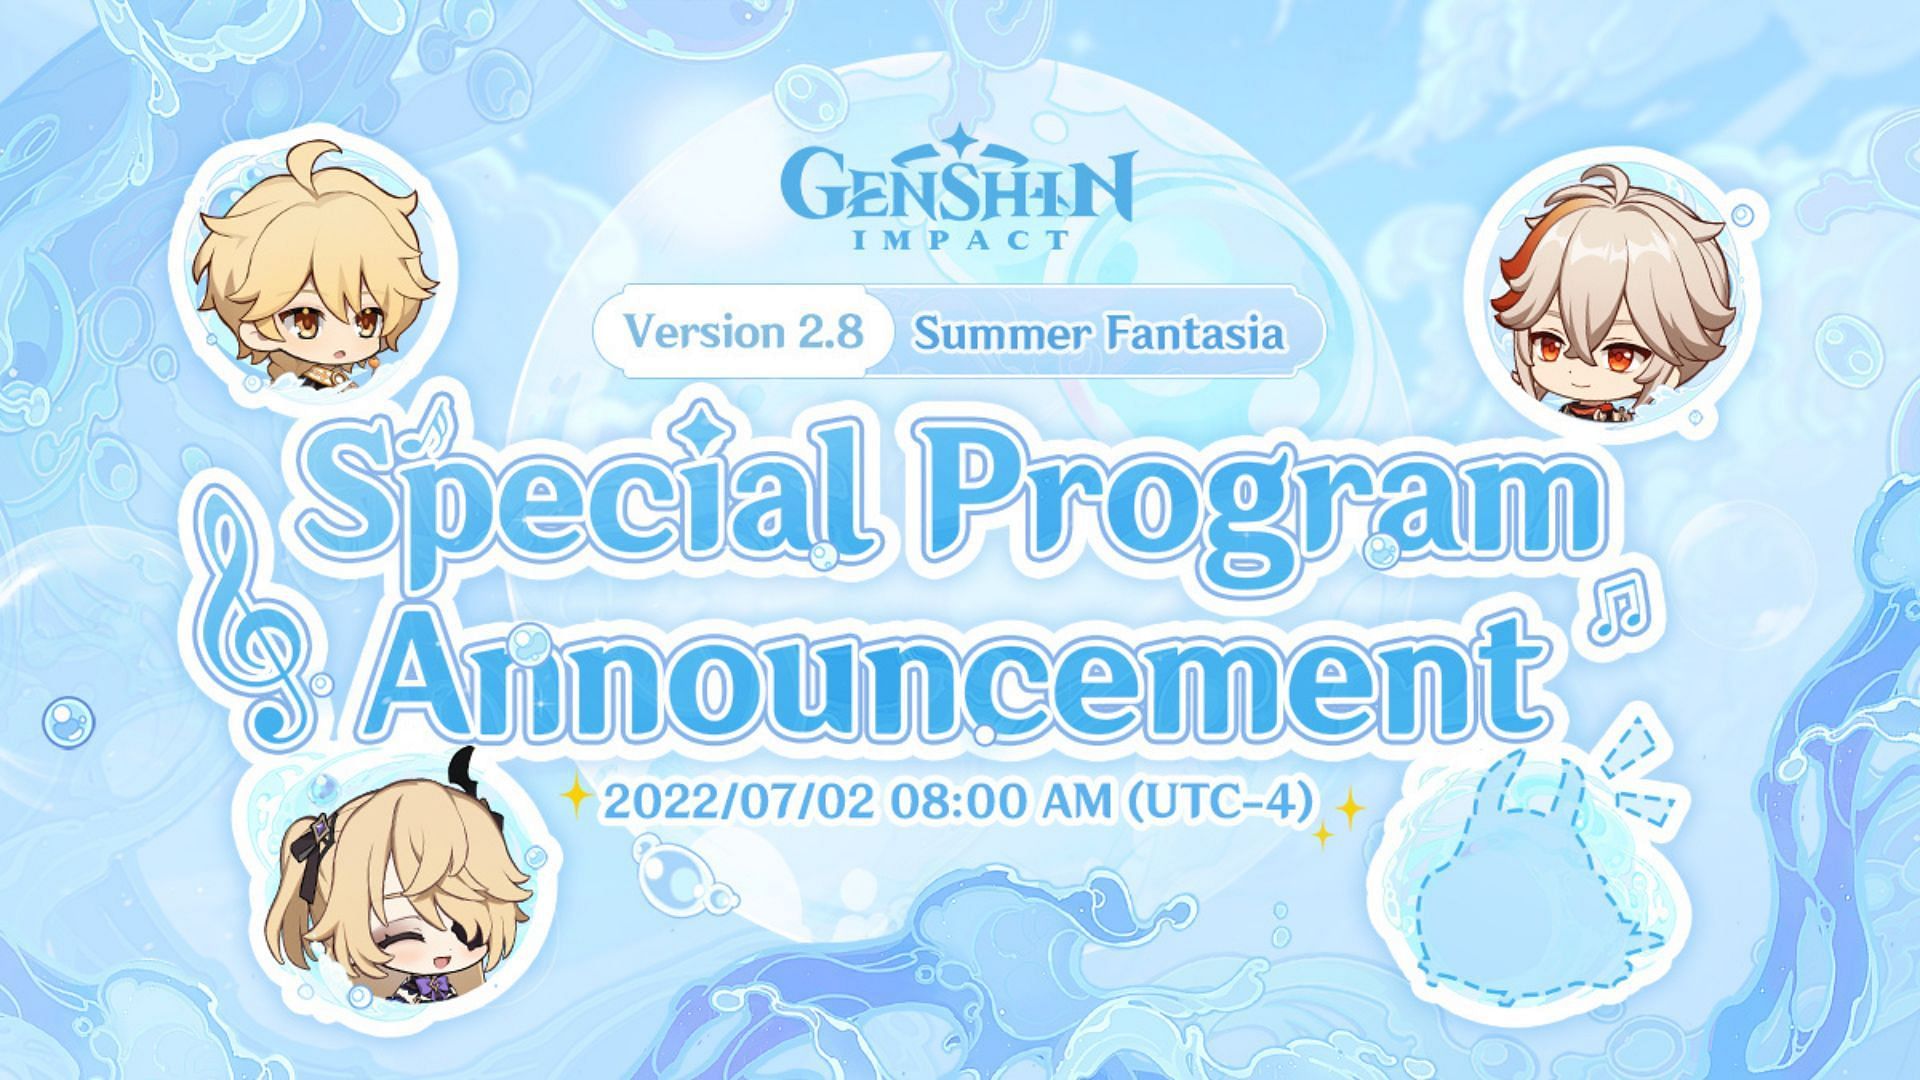 Officials have announced the 2.8 Special Program (Image via Genshin Impact)